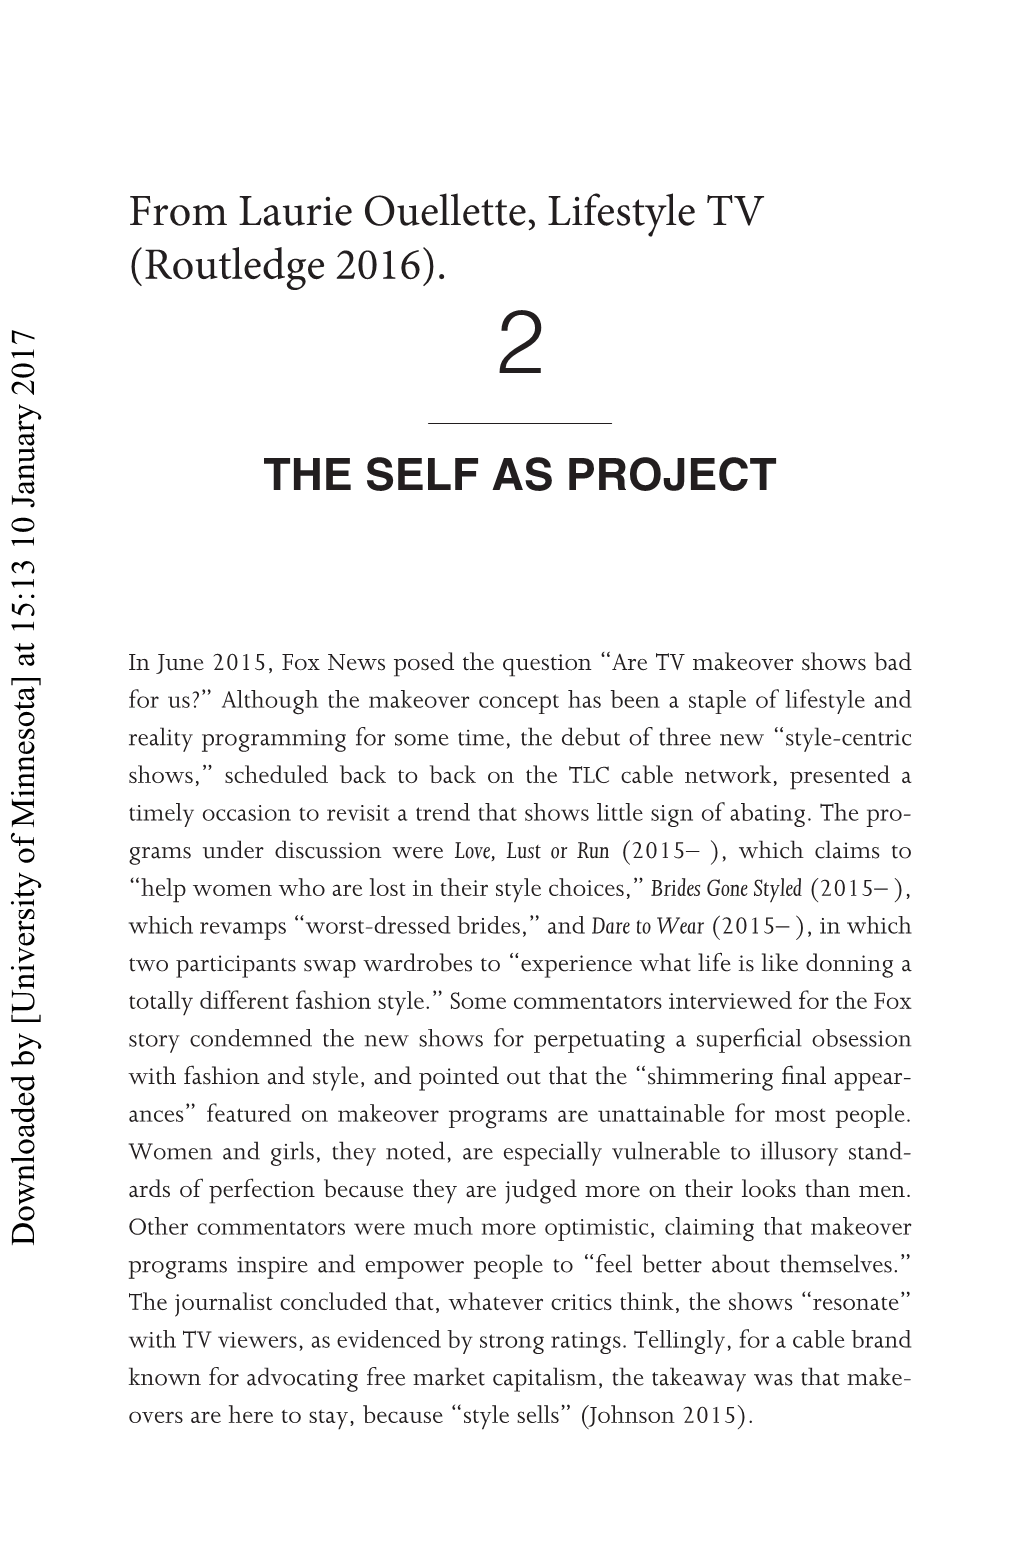 THE SELF AS PROJECT from Laurie Ouellette, Lifestyle TV